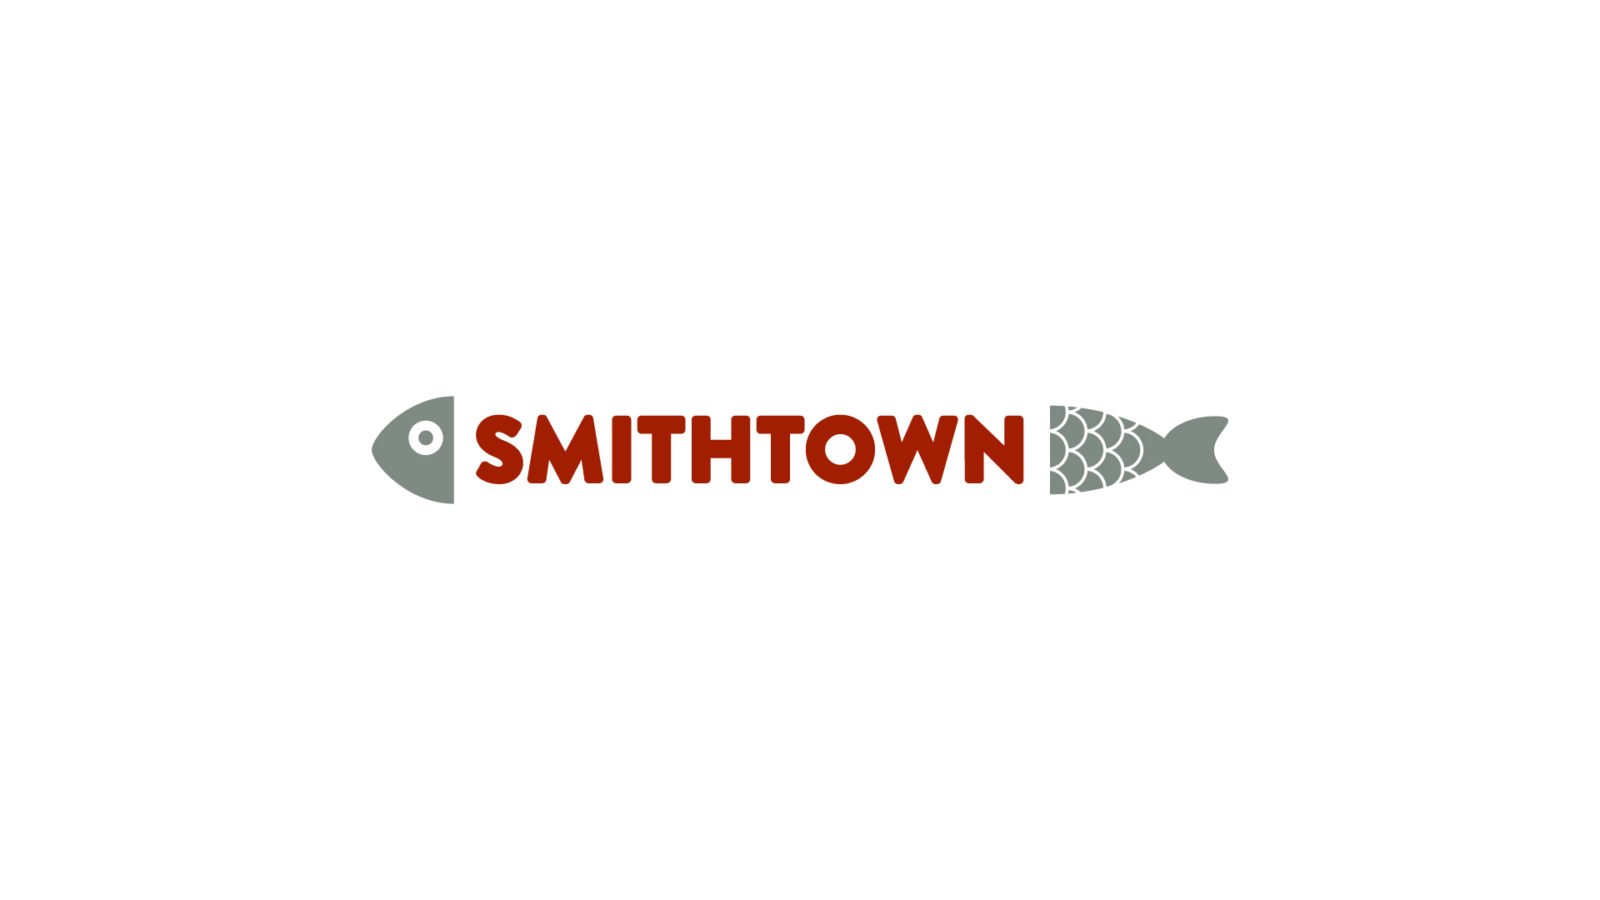 A Brand Identity for Smithtown Seafood by Bullhorn Creative